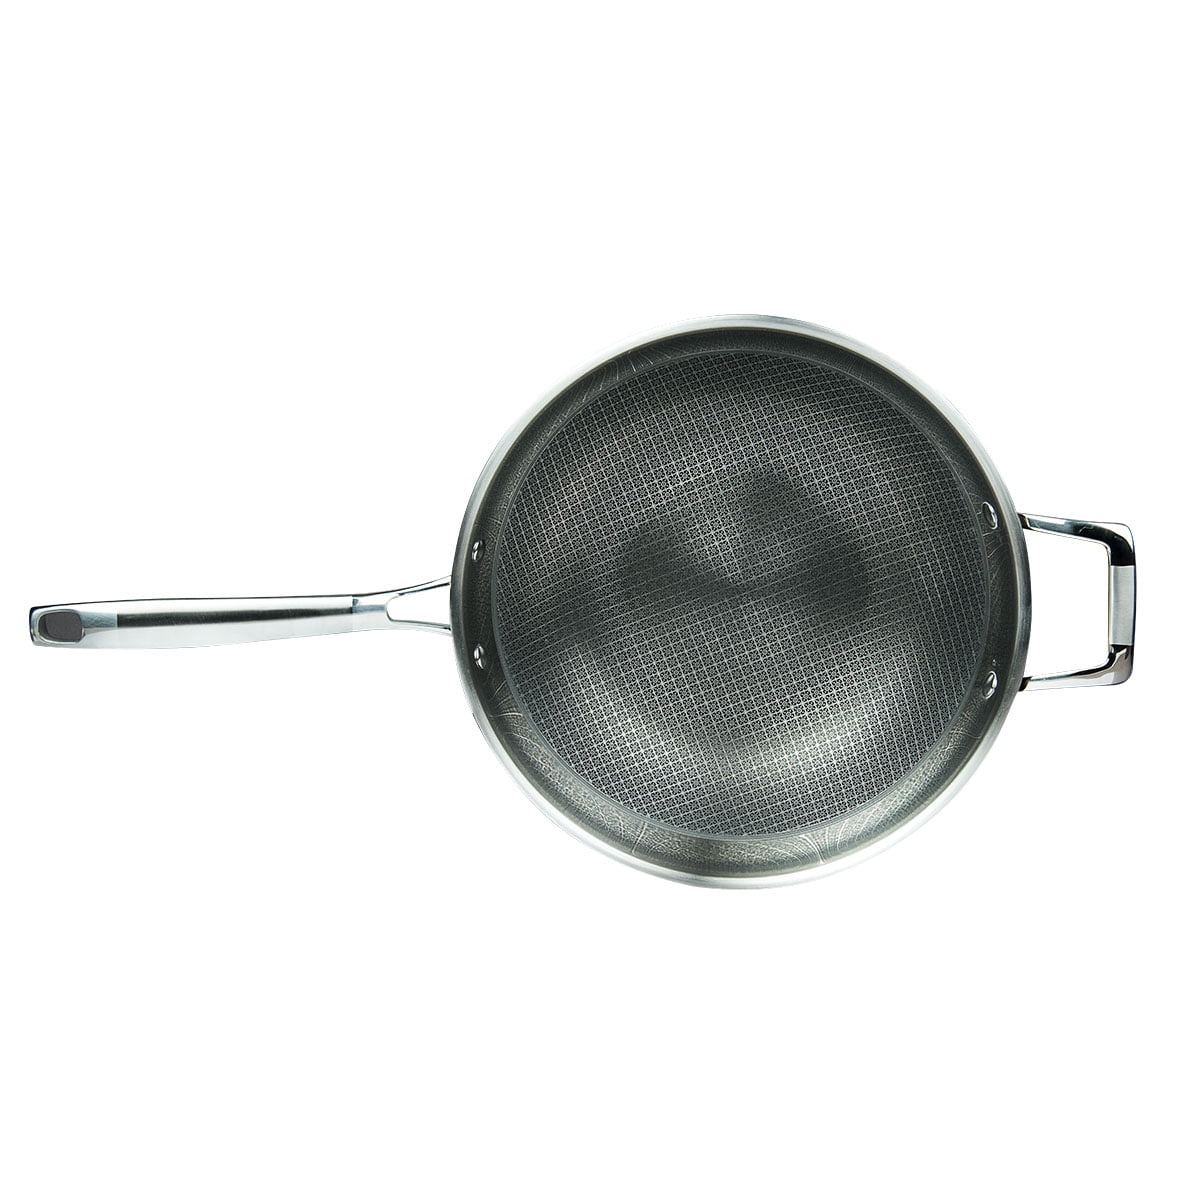 Master Pan MP102 3-PLY Stainless Steel Premium ILAG Non-Stick Scratch-Resistant Wok